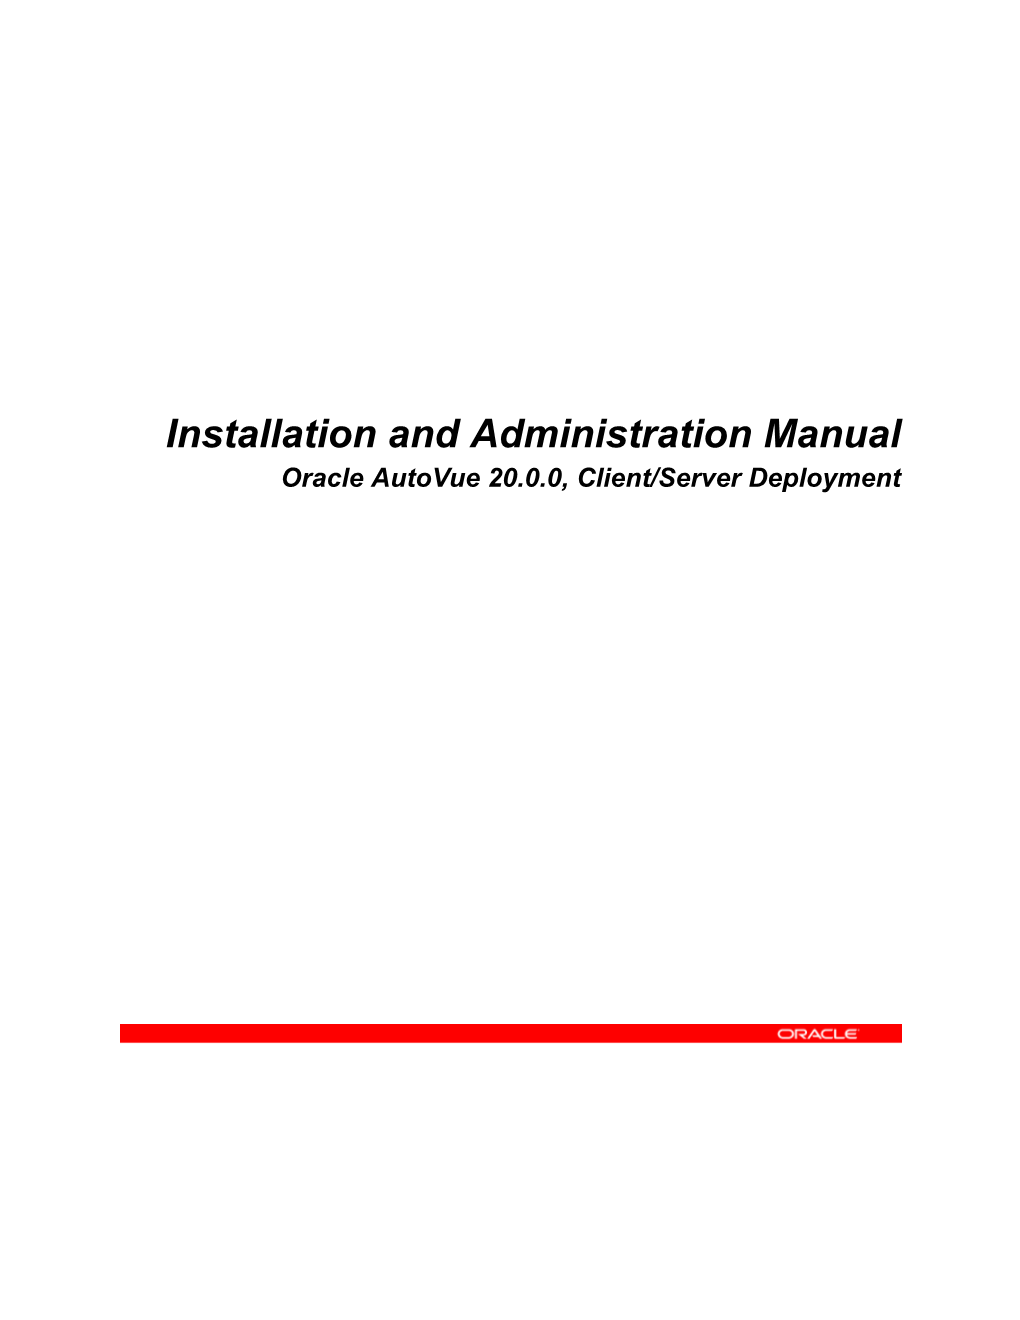 Installation and Administration Manual Oracle Autovue 20.0.0, Client/Server Deployment Copyright © 1999, 2010, Oracle And/Or Its Affiliates